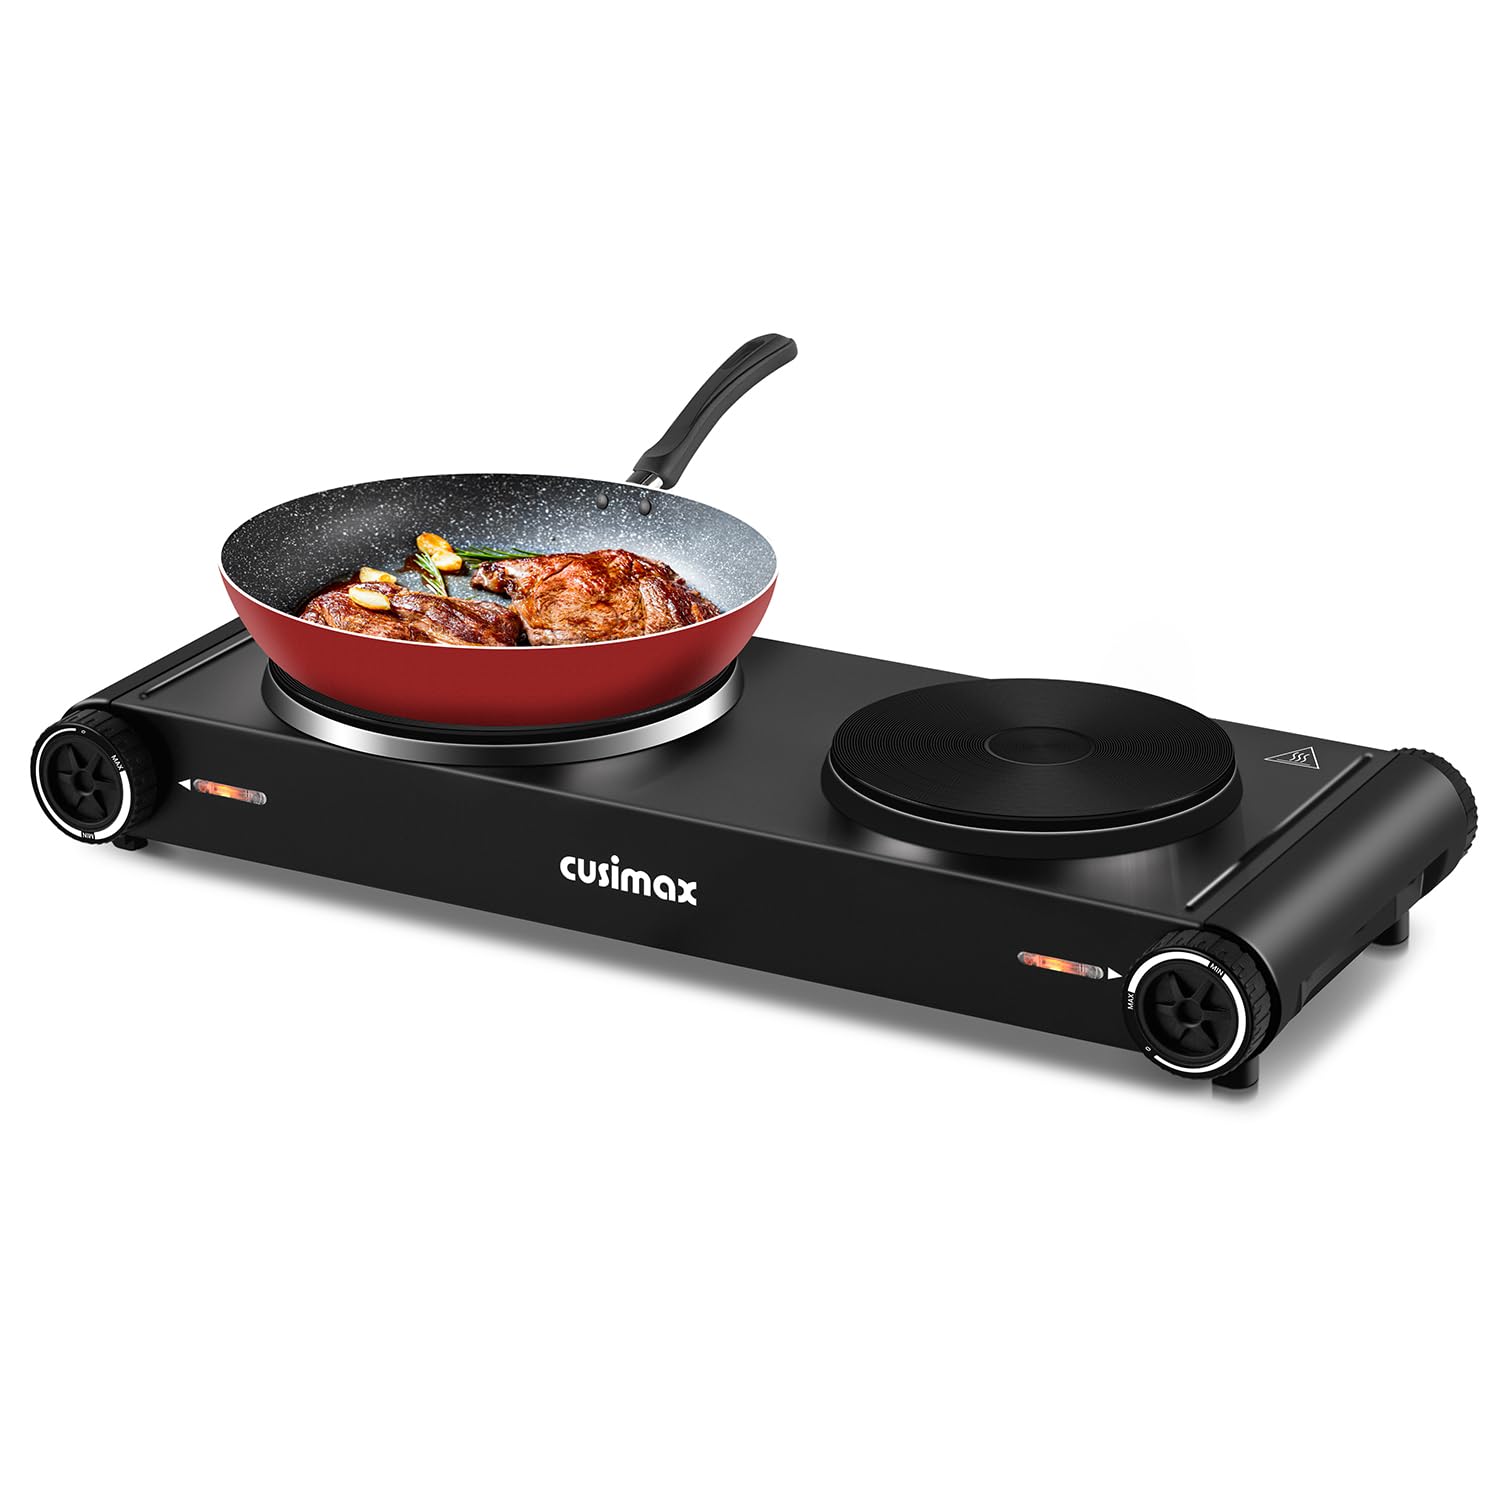 Cusimax 1800W Portable Electric Countertop Double Burner,Stainless Ste